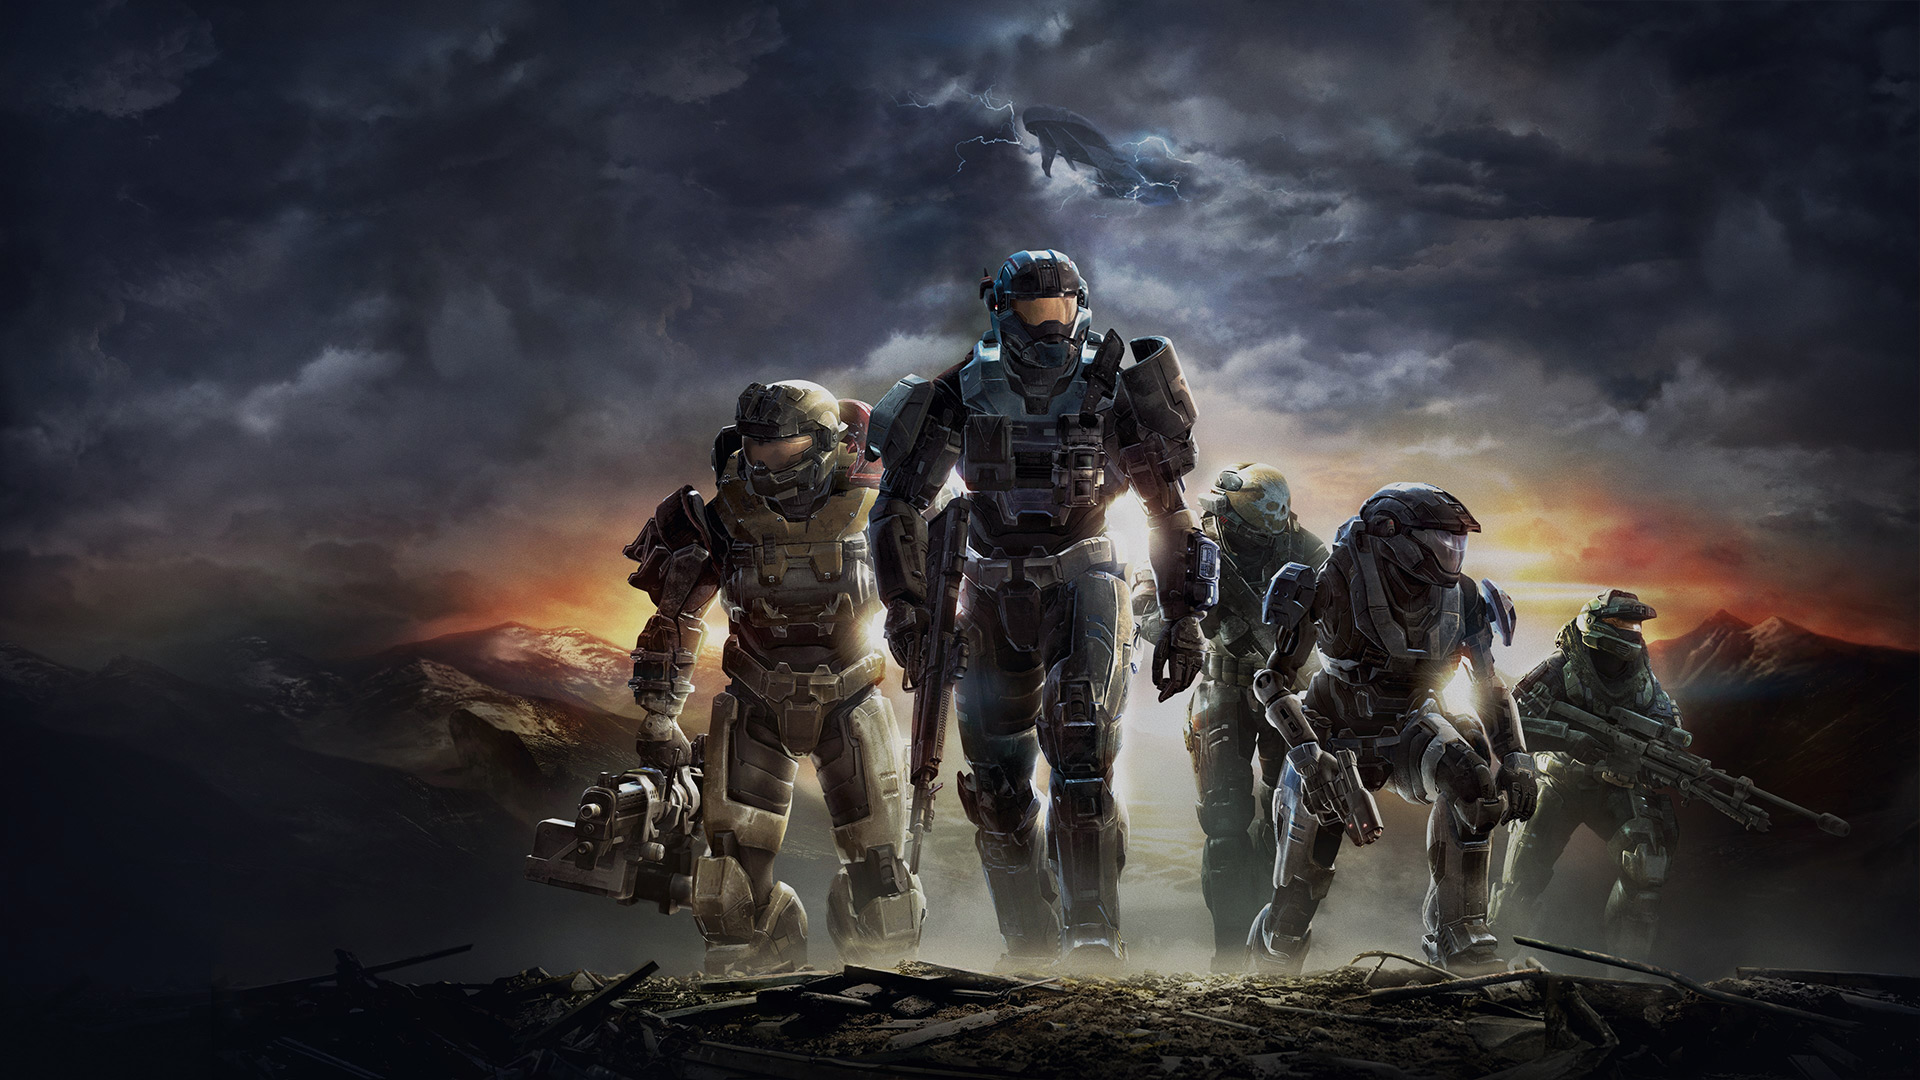 Halo games in order: Halo Reach art showing a squad of Spartans.